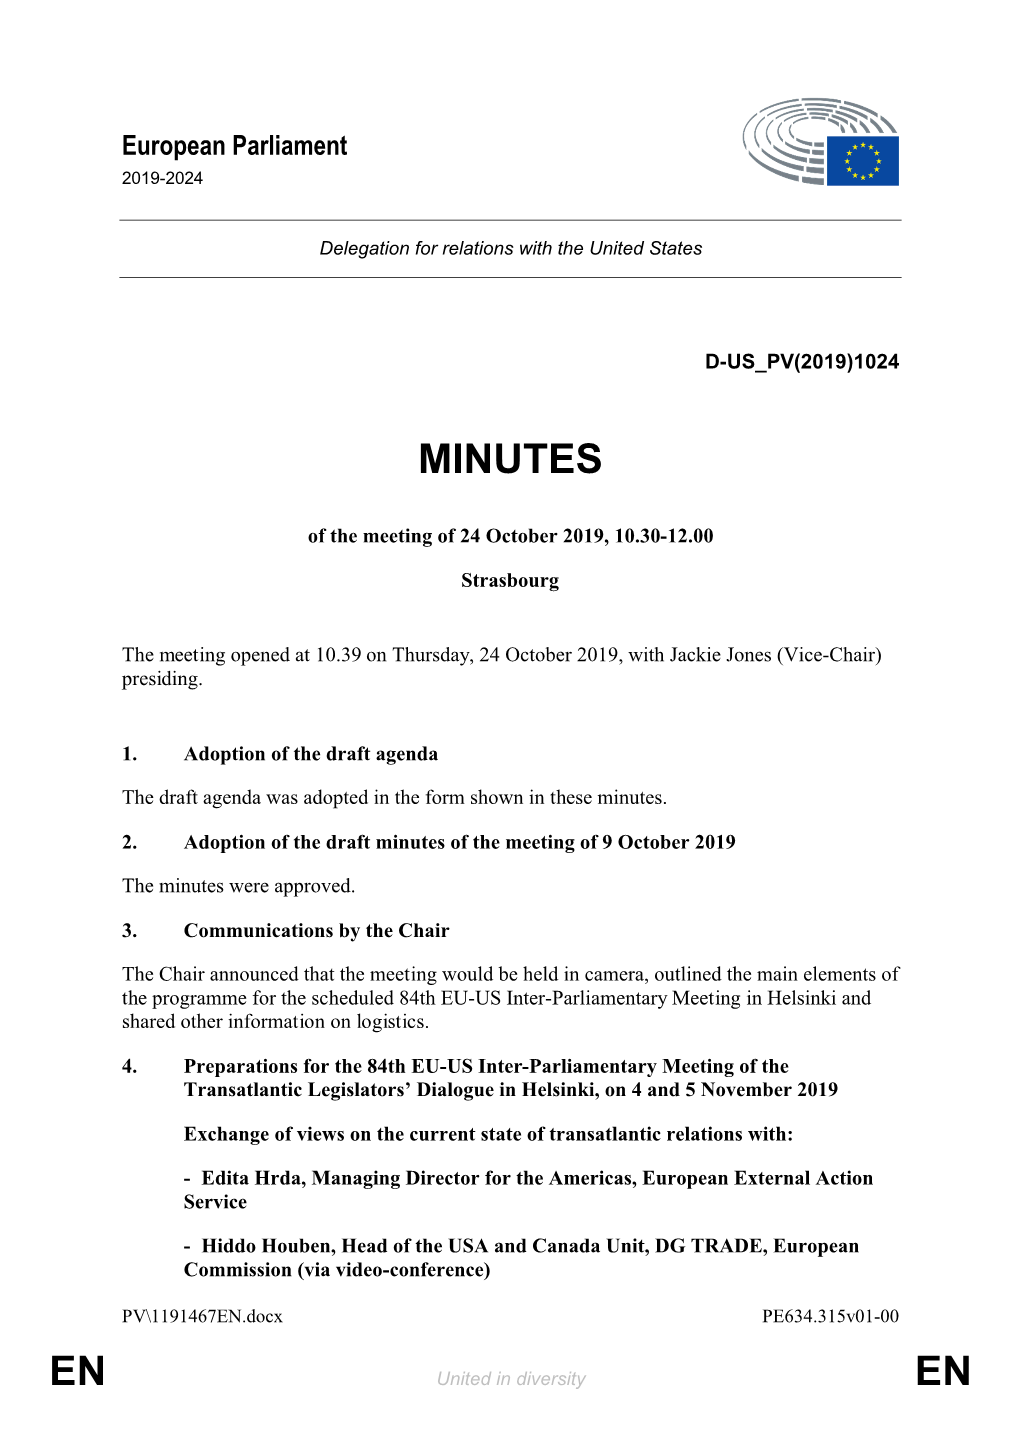 Minutes of the Meeting of 24 October 2019